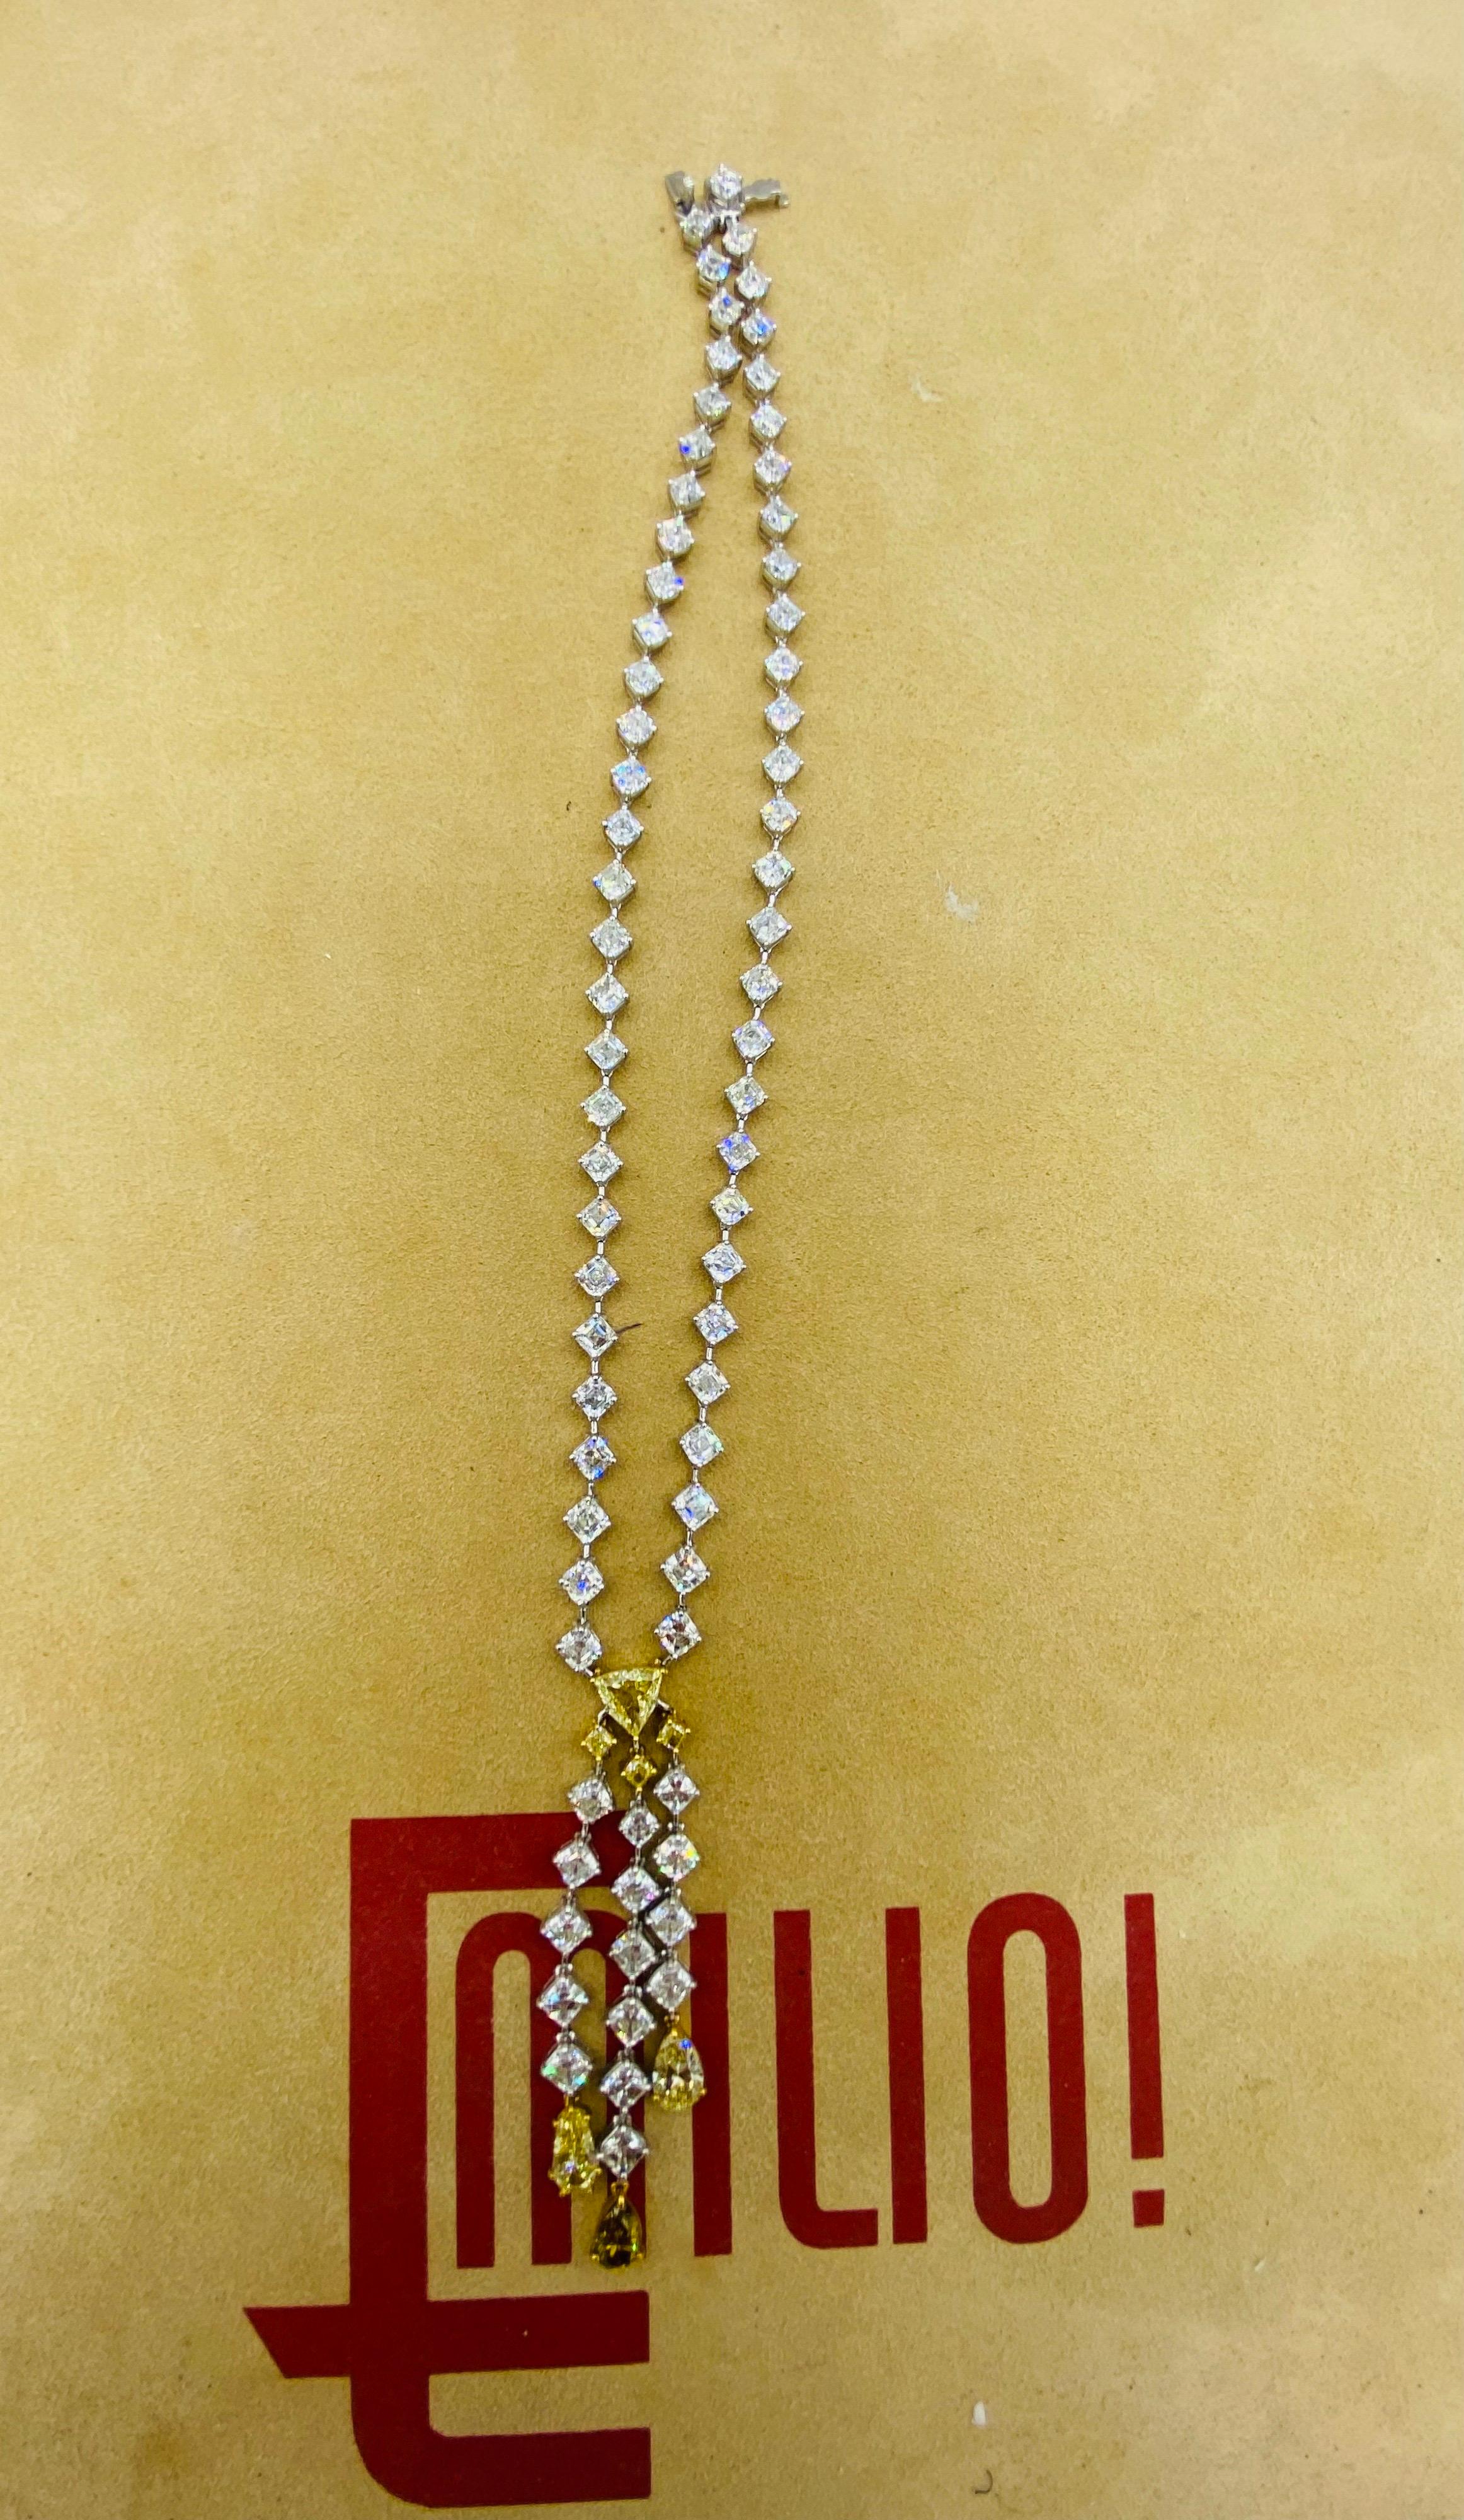 From the vault at Emilio Jewelry in New York,
a unique diamond necklaces featuring Asscher cut diamonds, 
Length: 16” 
2.75” lariet hanging 
diamond details:
1 Gia certified Fancy intense yellow diamond 1.06cts
1 Gia certified pear shape fancy deep